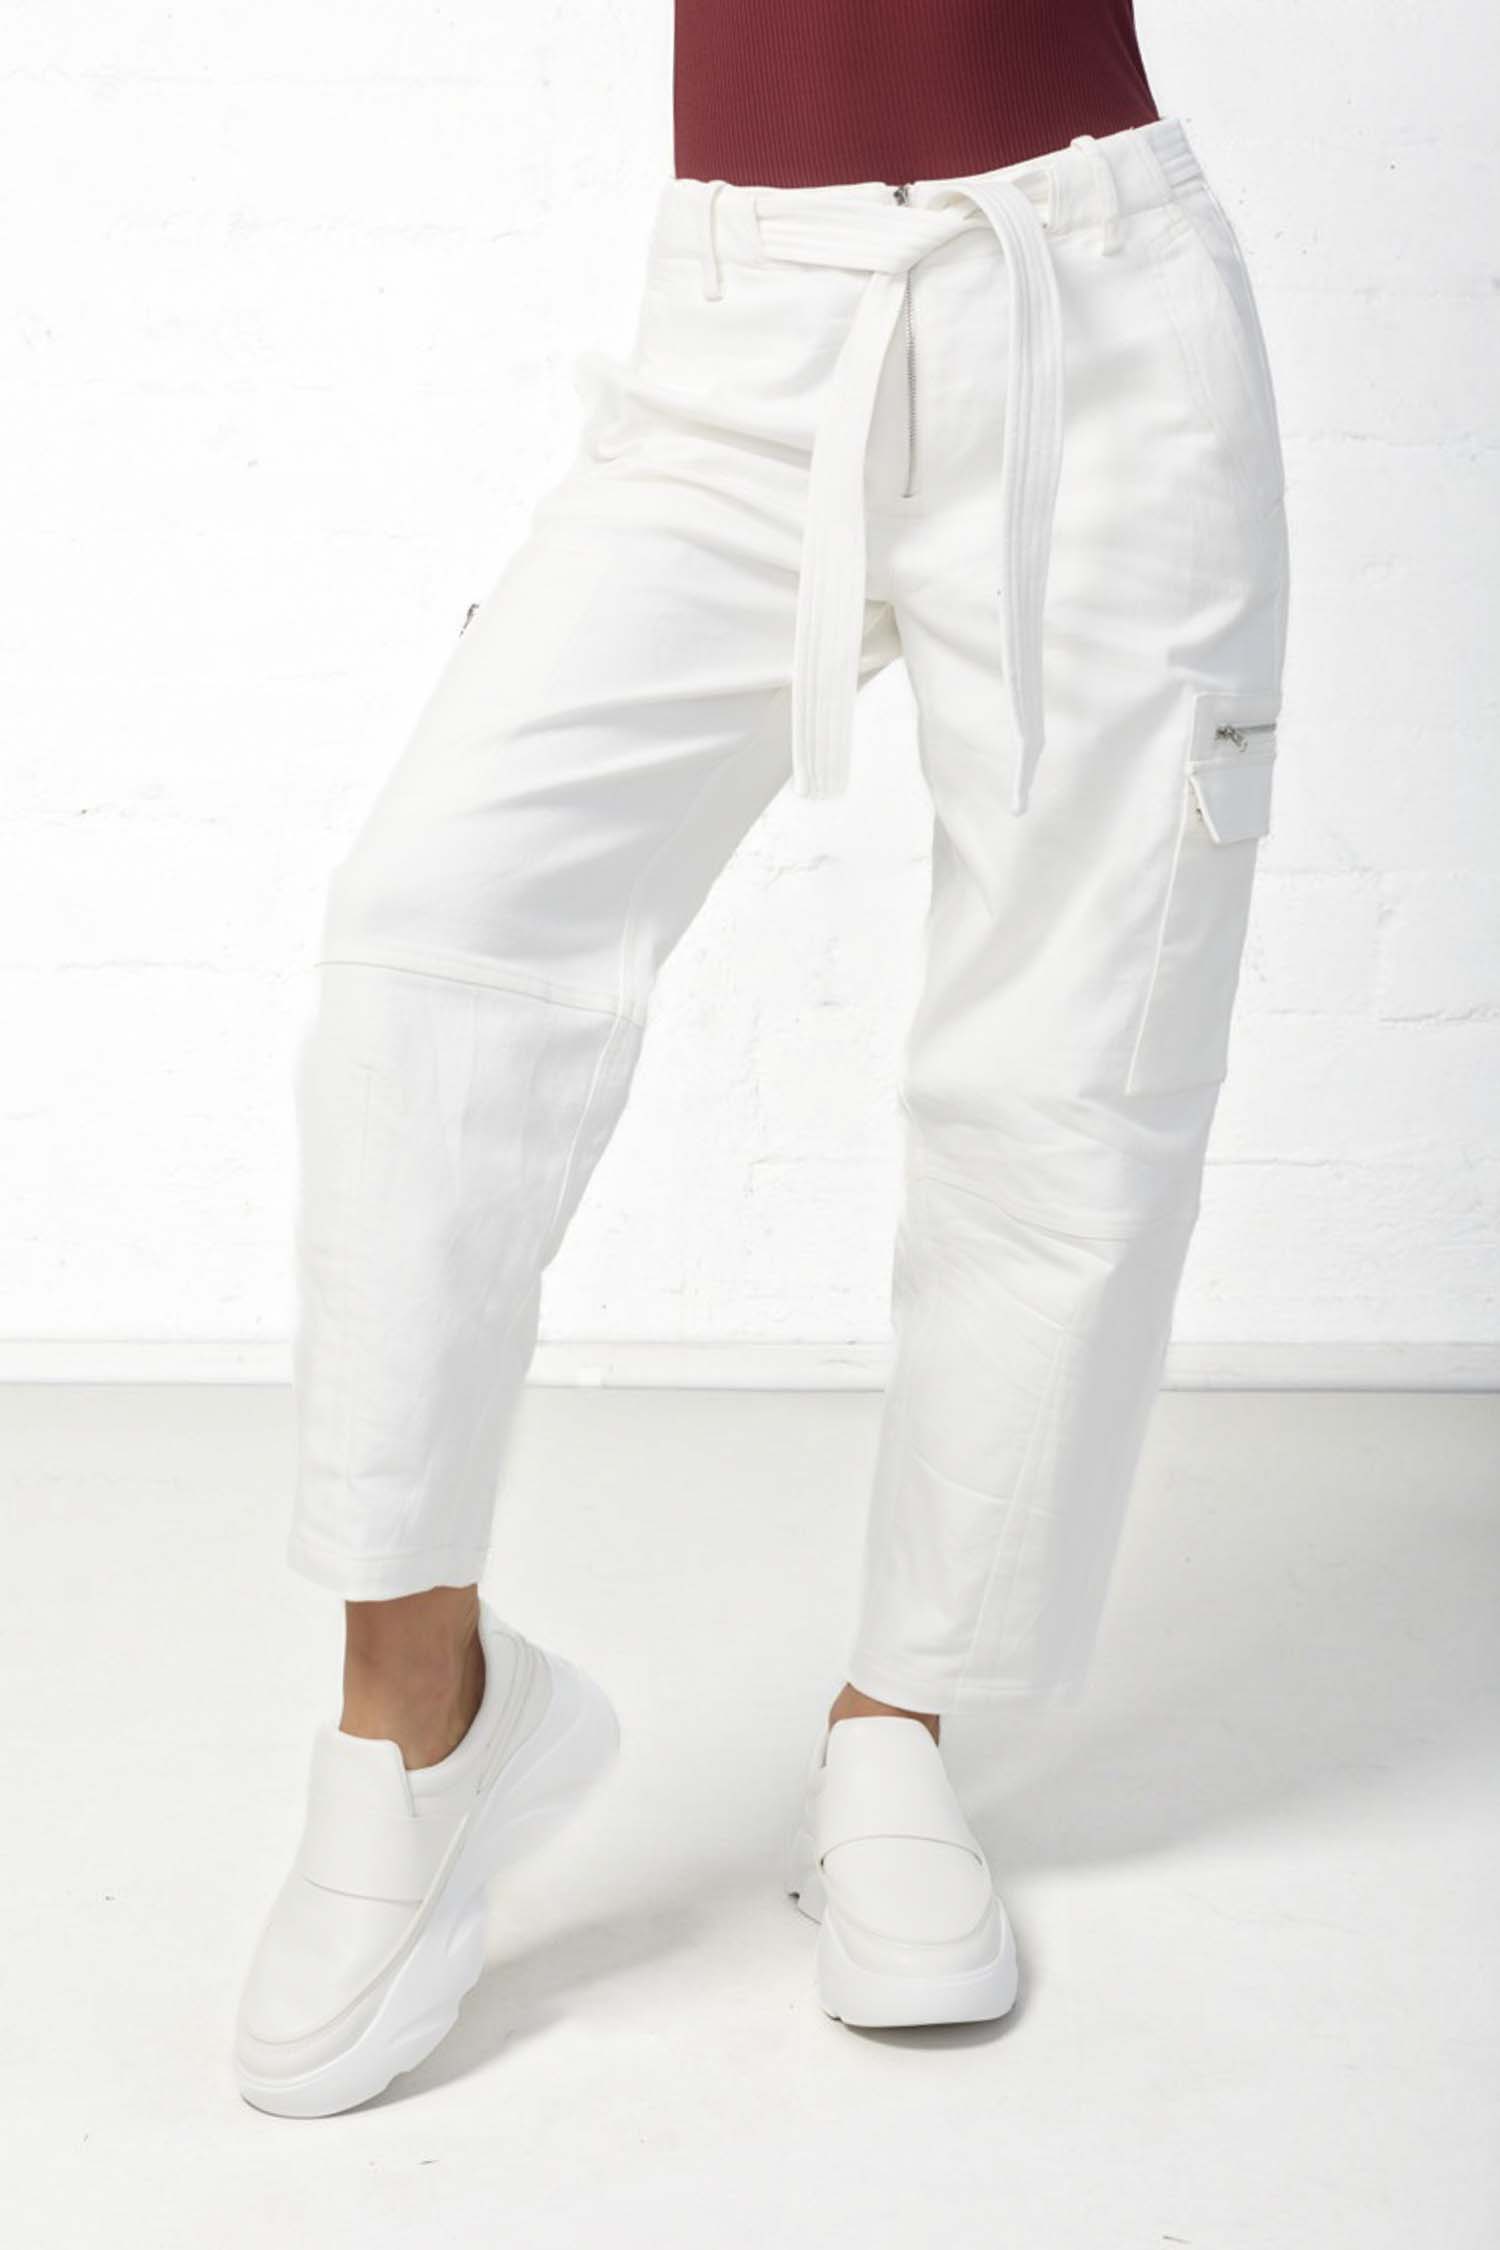 Orion Crop Cargo Pant